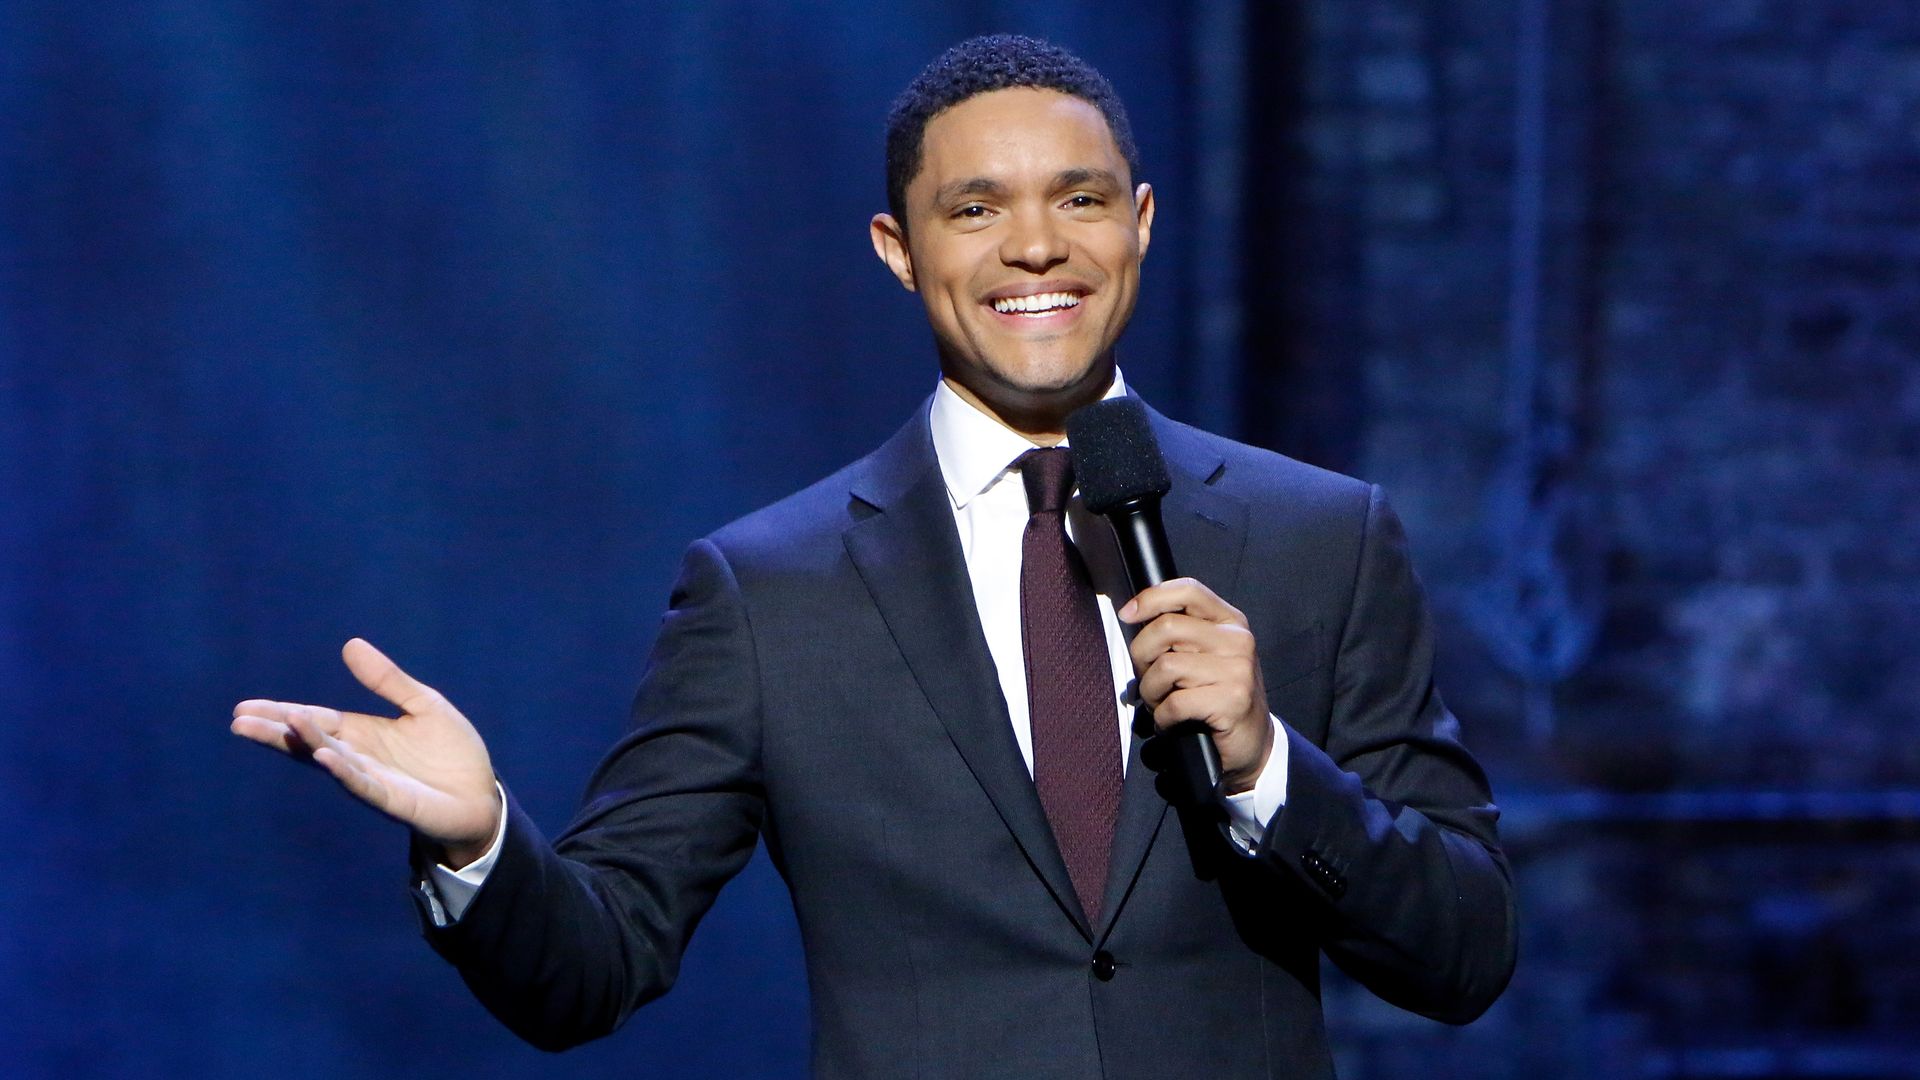 Trevor Noah speaks at a comedy event in 2017.